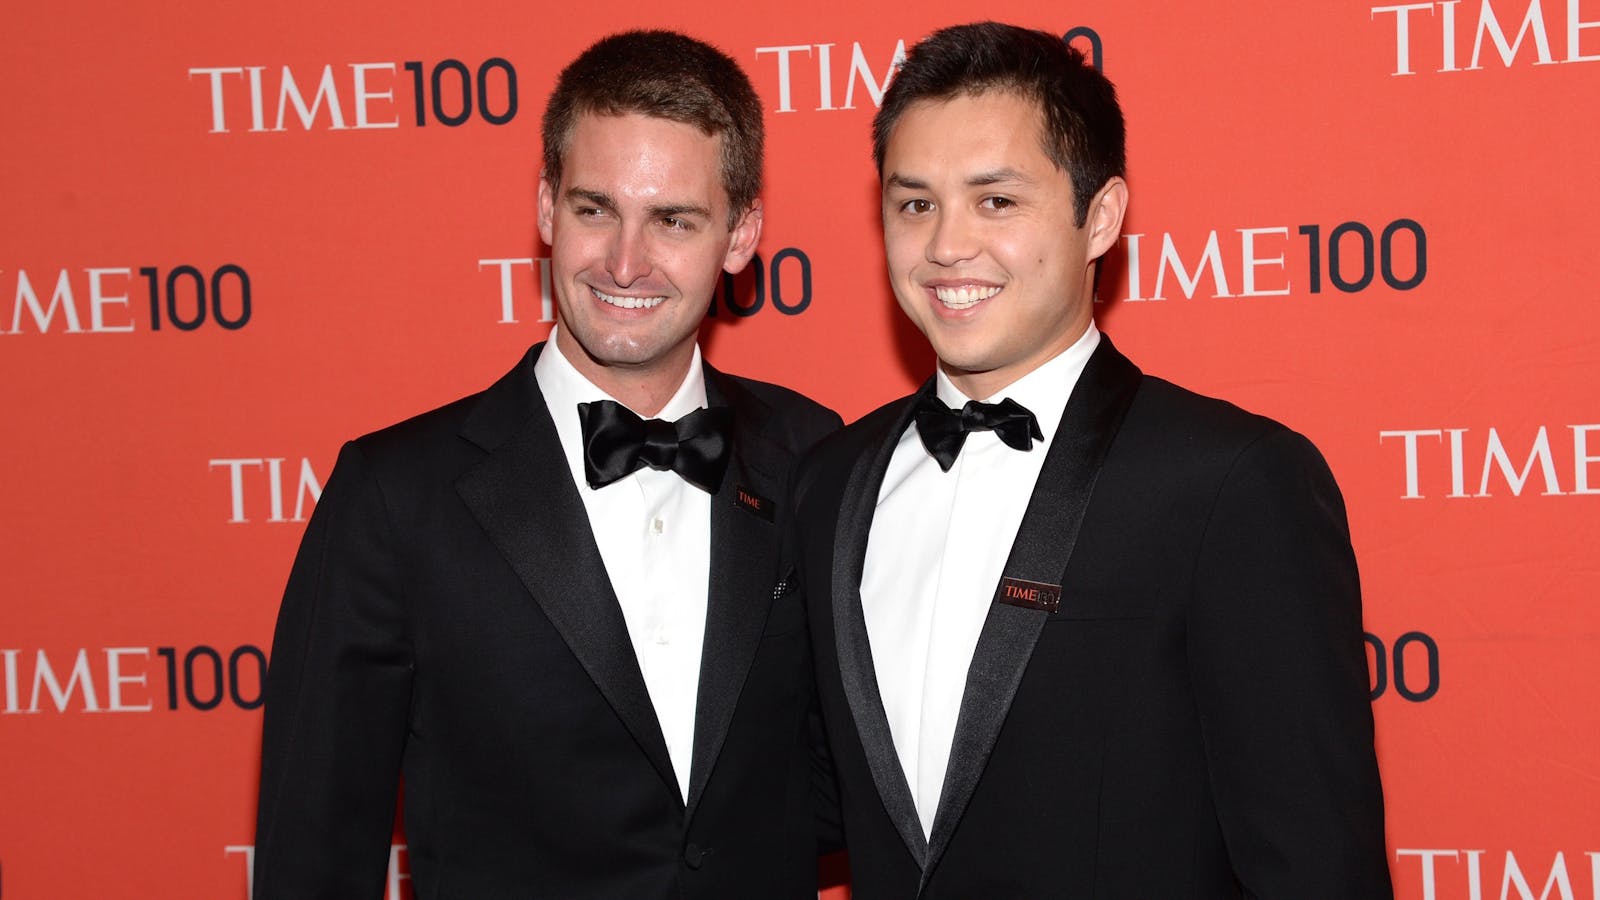 Snap's co-founders Evan Spiegel and Bobby Murphy. Photo by AP.